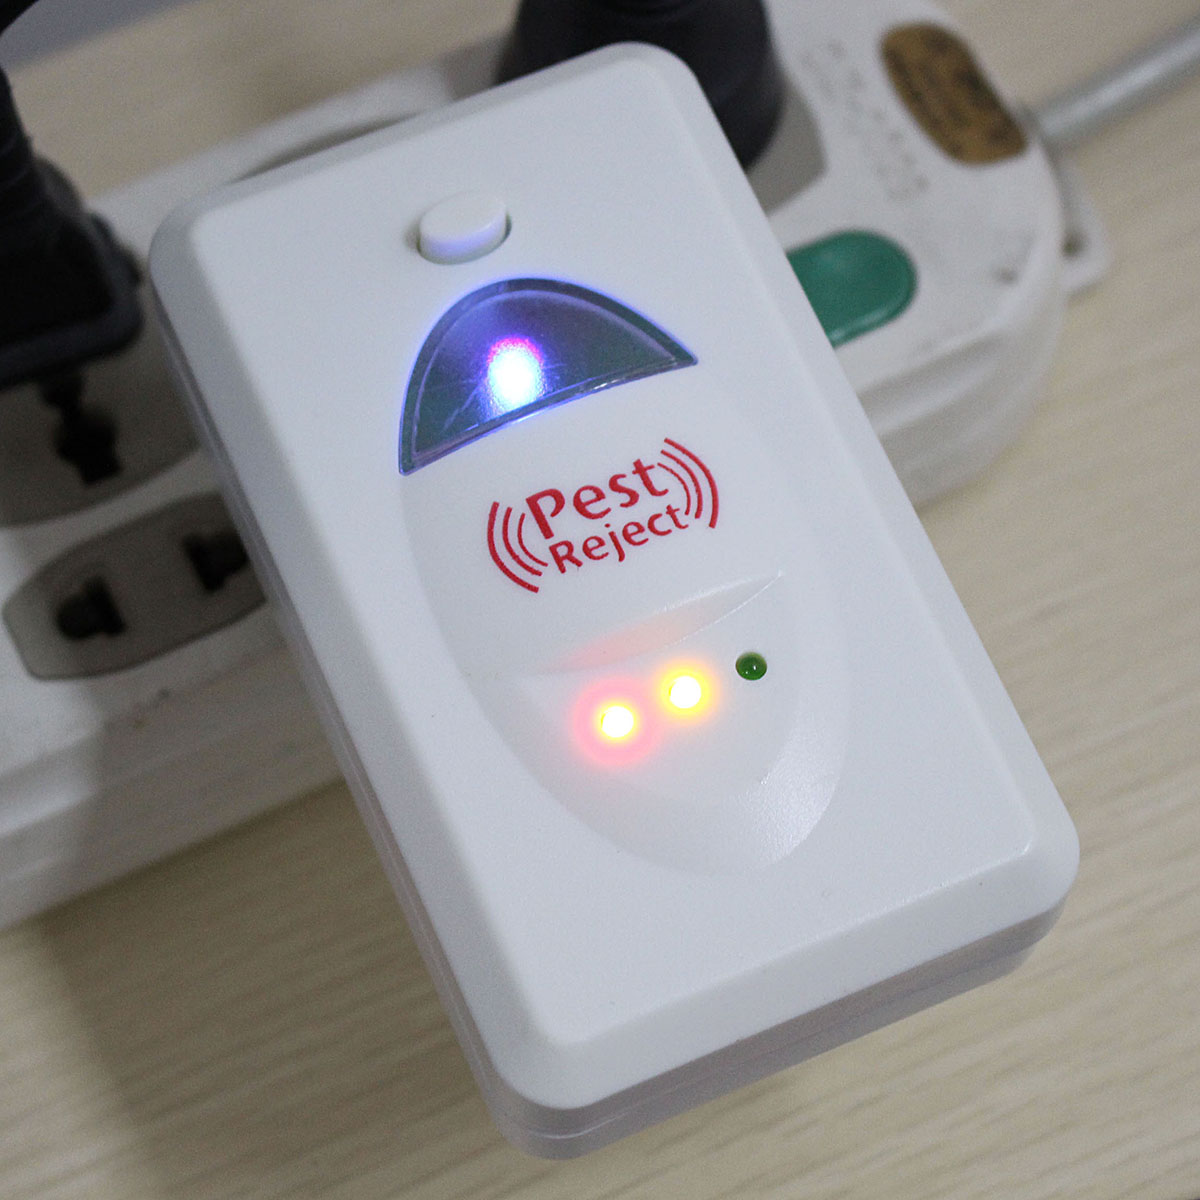 Ultrasonic-Electronic-Pest-Animal-Repeller-Reject-Anti-Mosquito-Bug-Insect-Enhanced-1397436-4